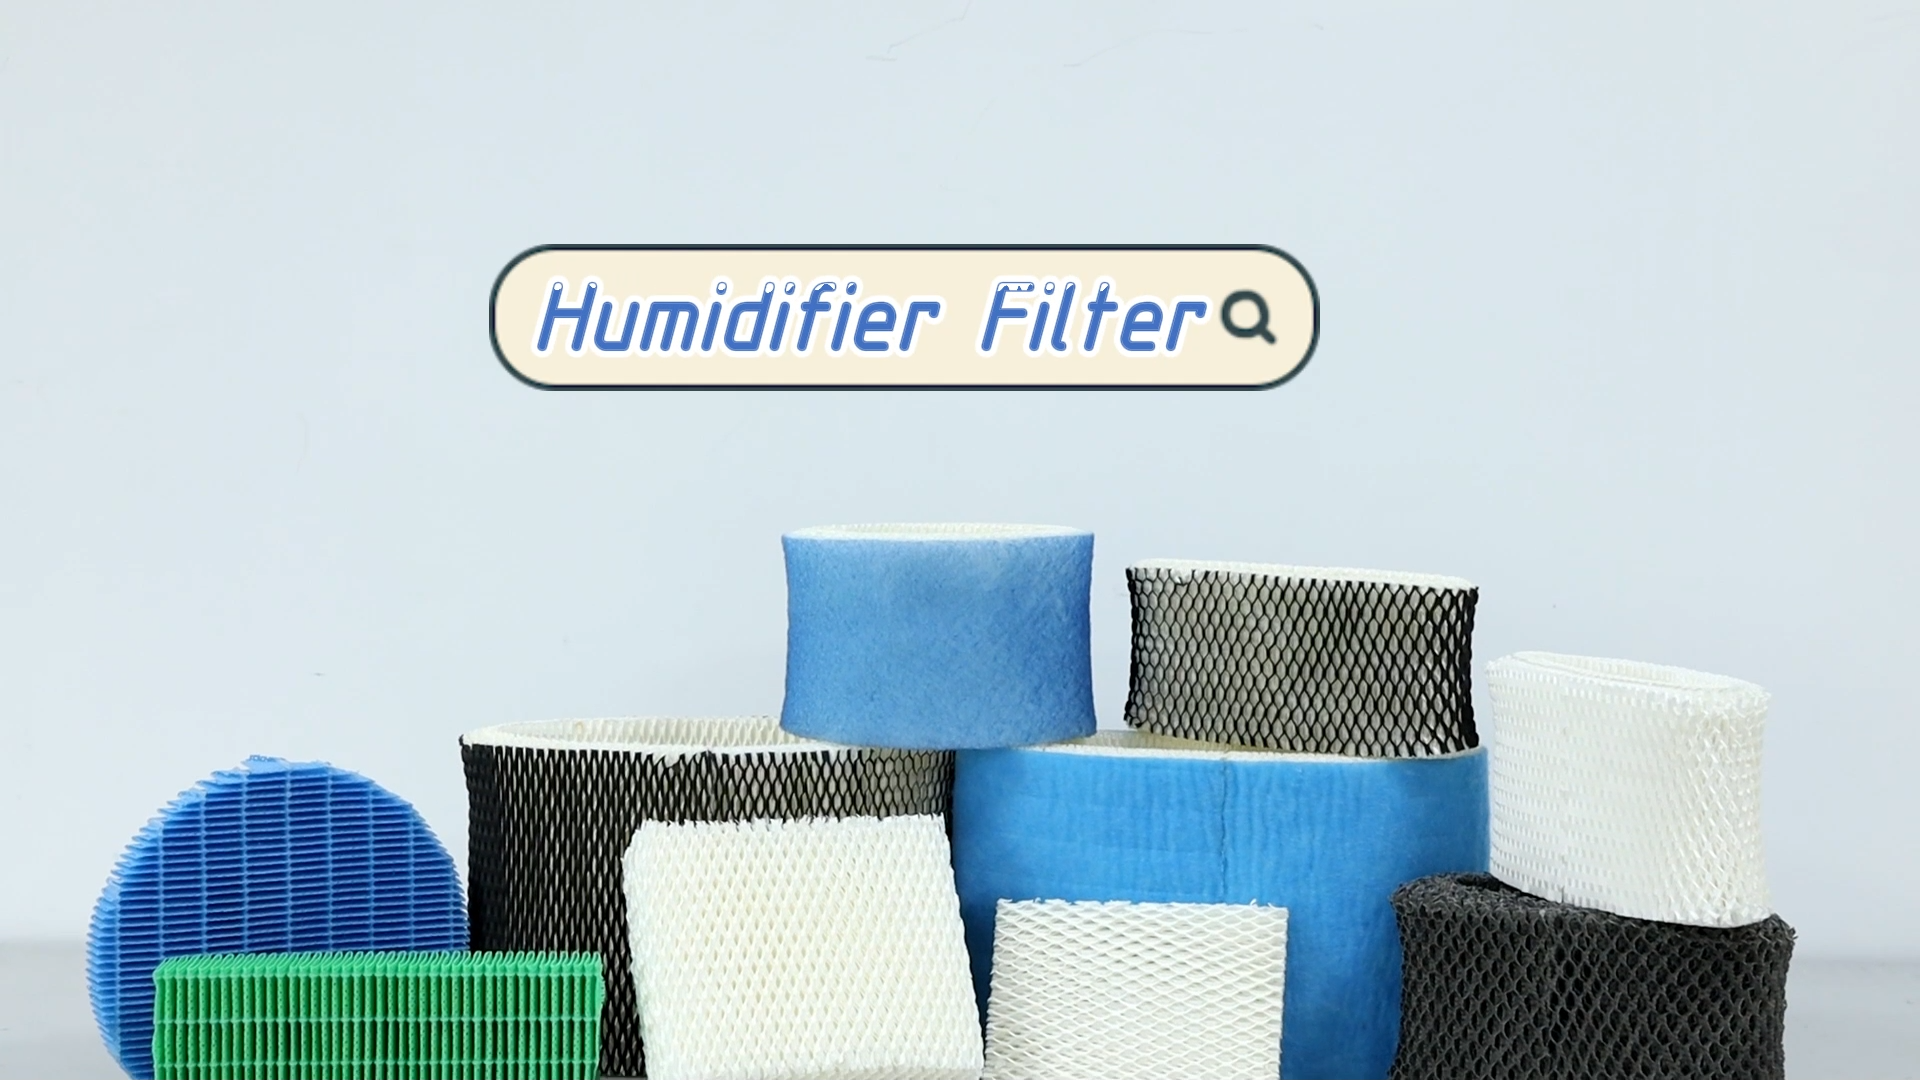 Humidifier Filters Compatible with Honeywell HC-14V1, HC-14, HC-14N Filter E